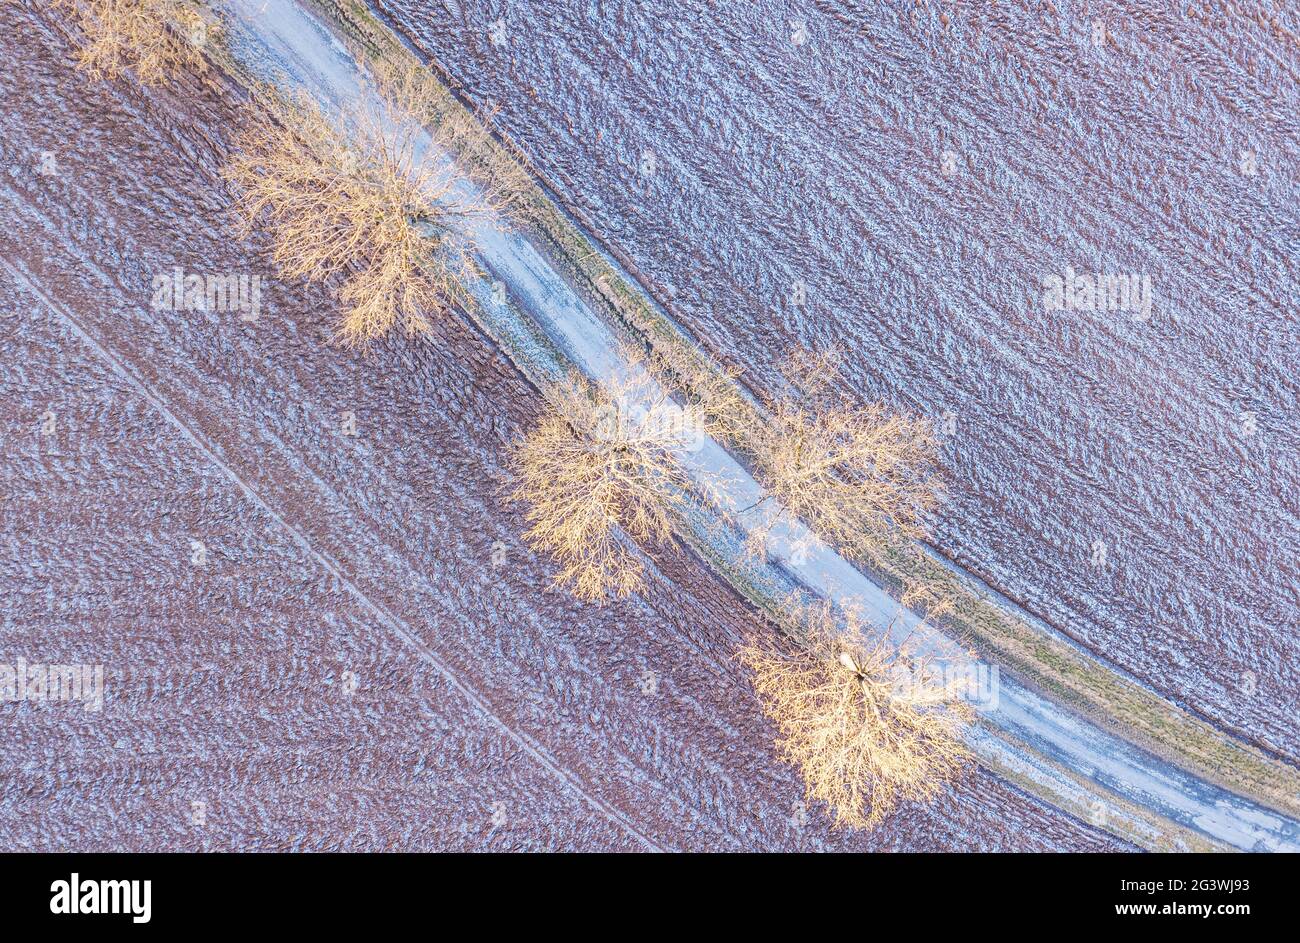 Windy winter road in snow covered fields Stock Photo